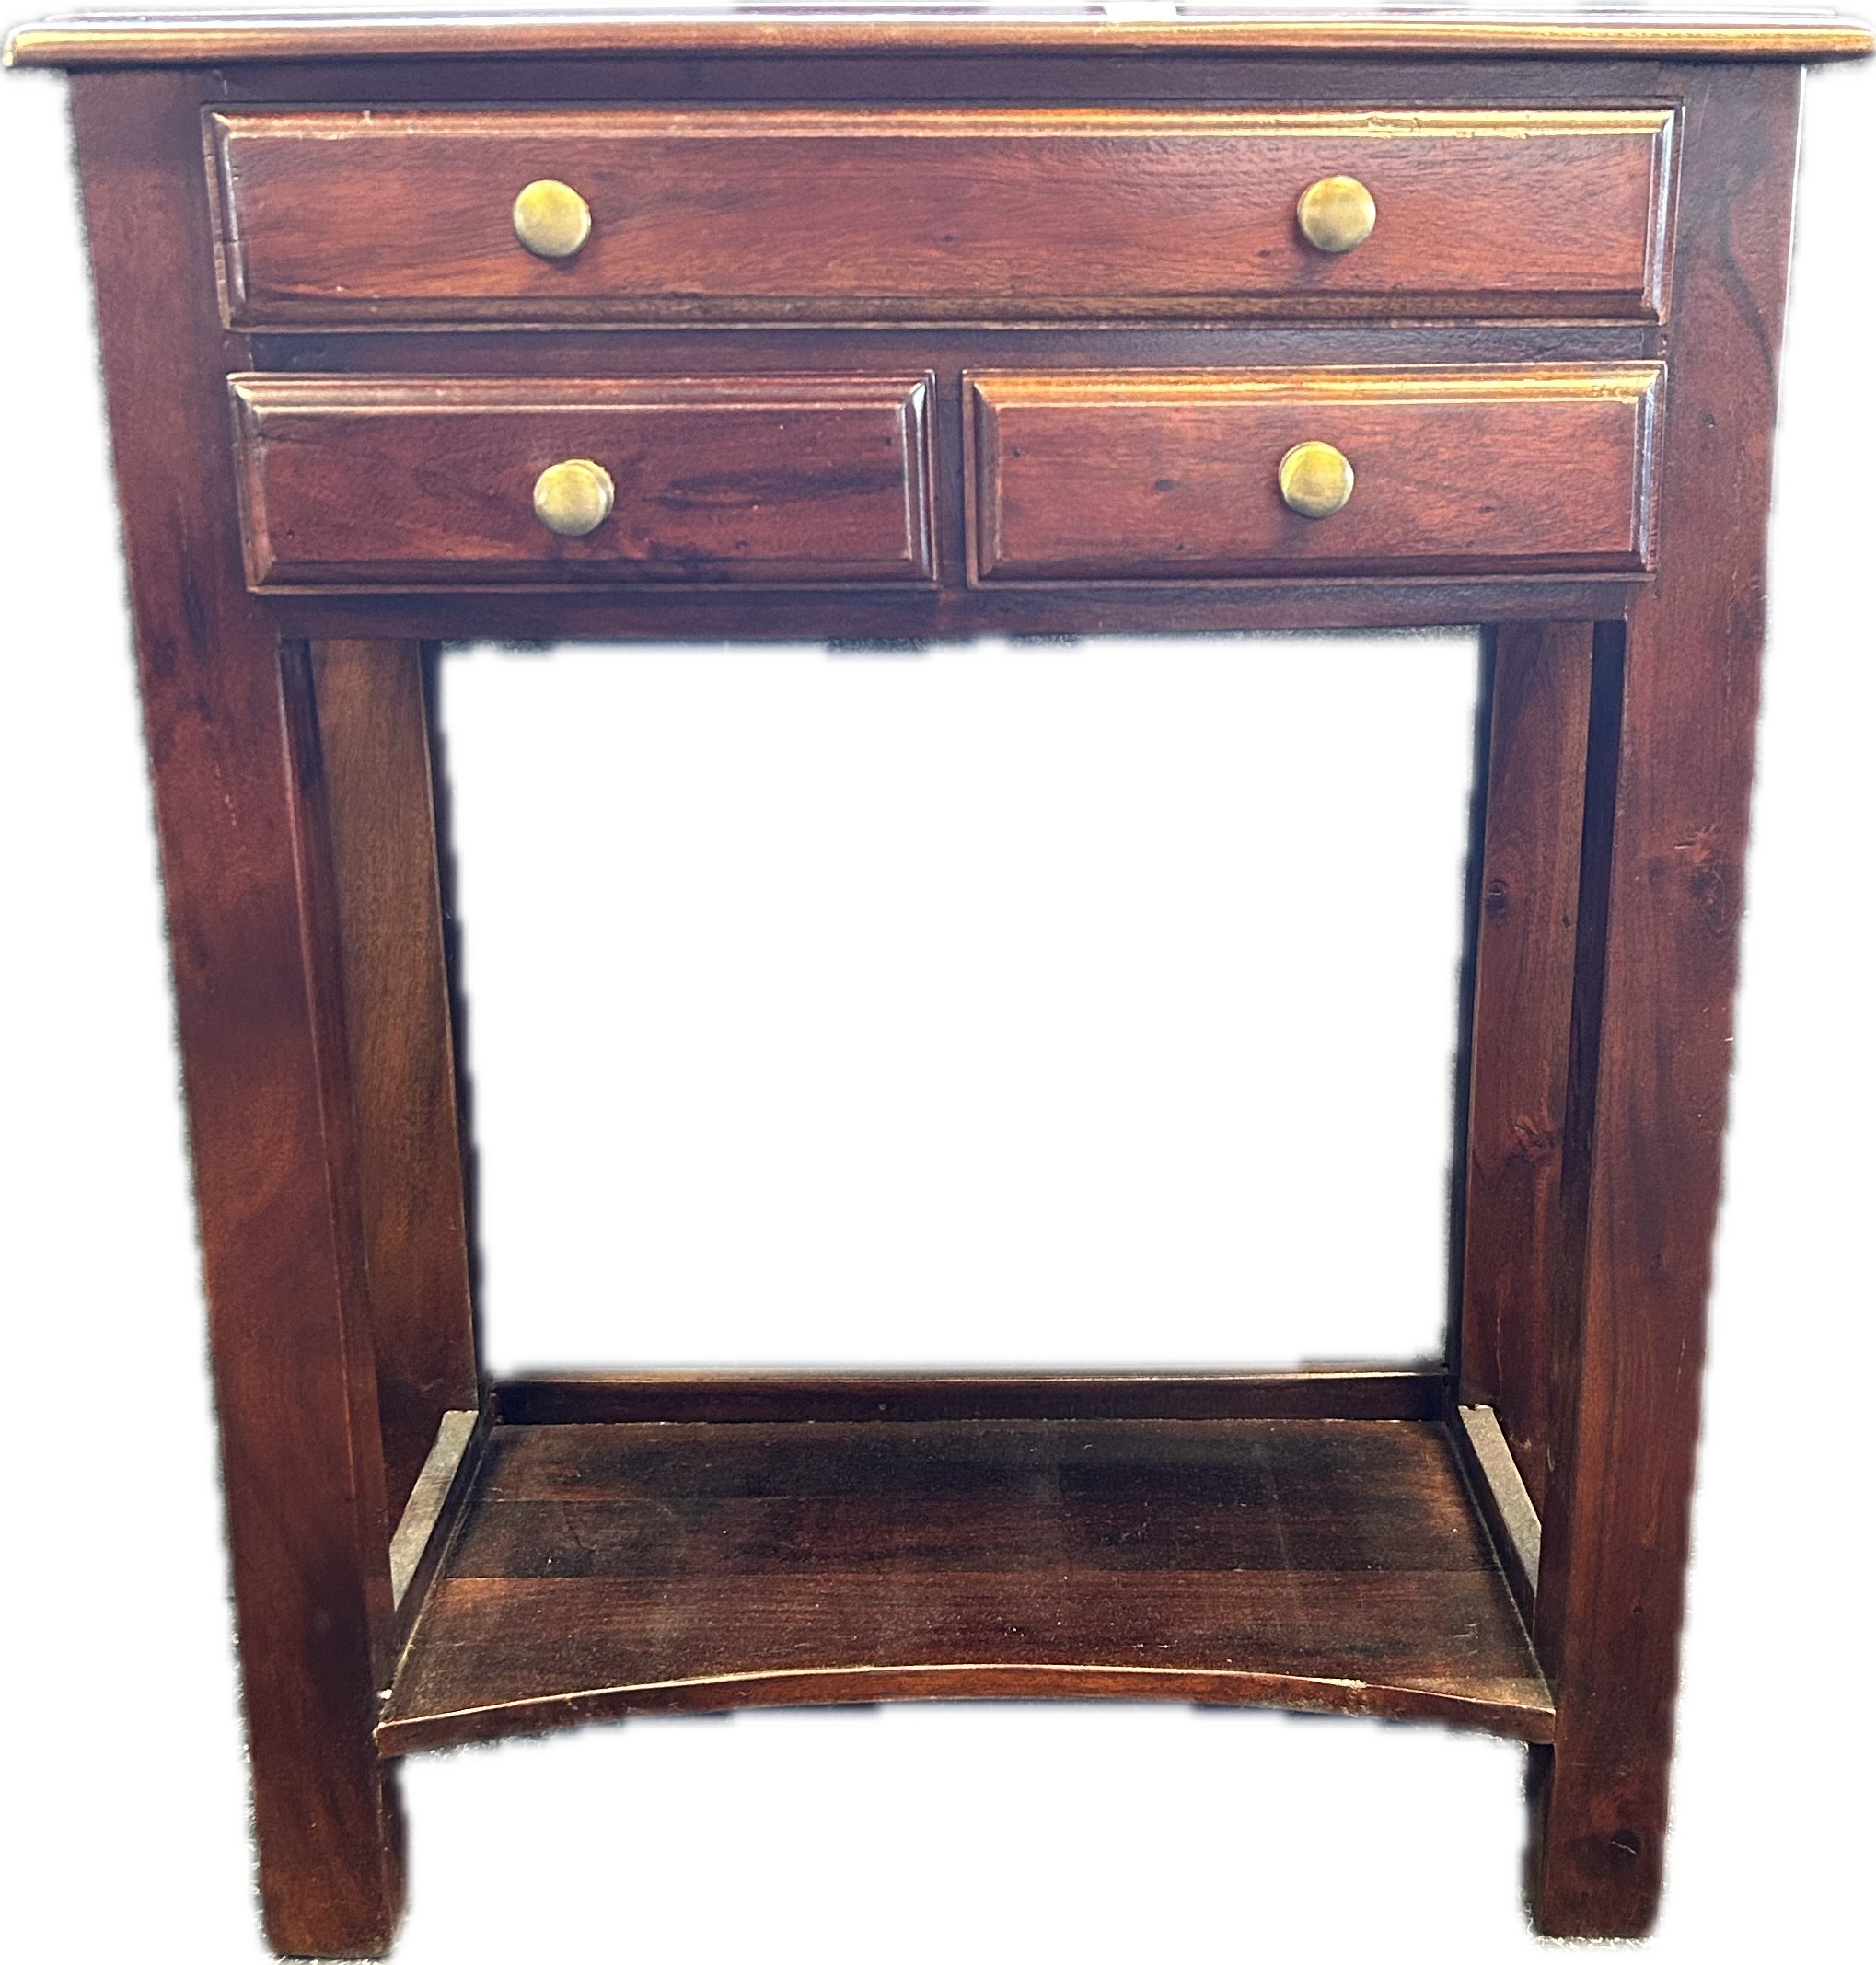 Reproduction mahogany side unit, with an arrangement of three drawers and a lower supporting - Image 3 of 3